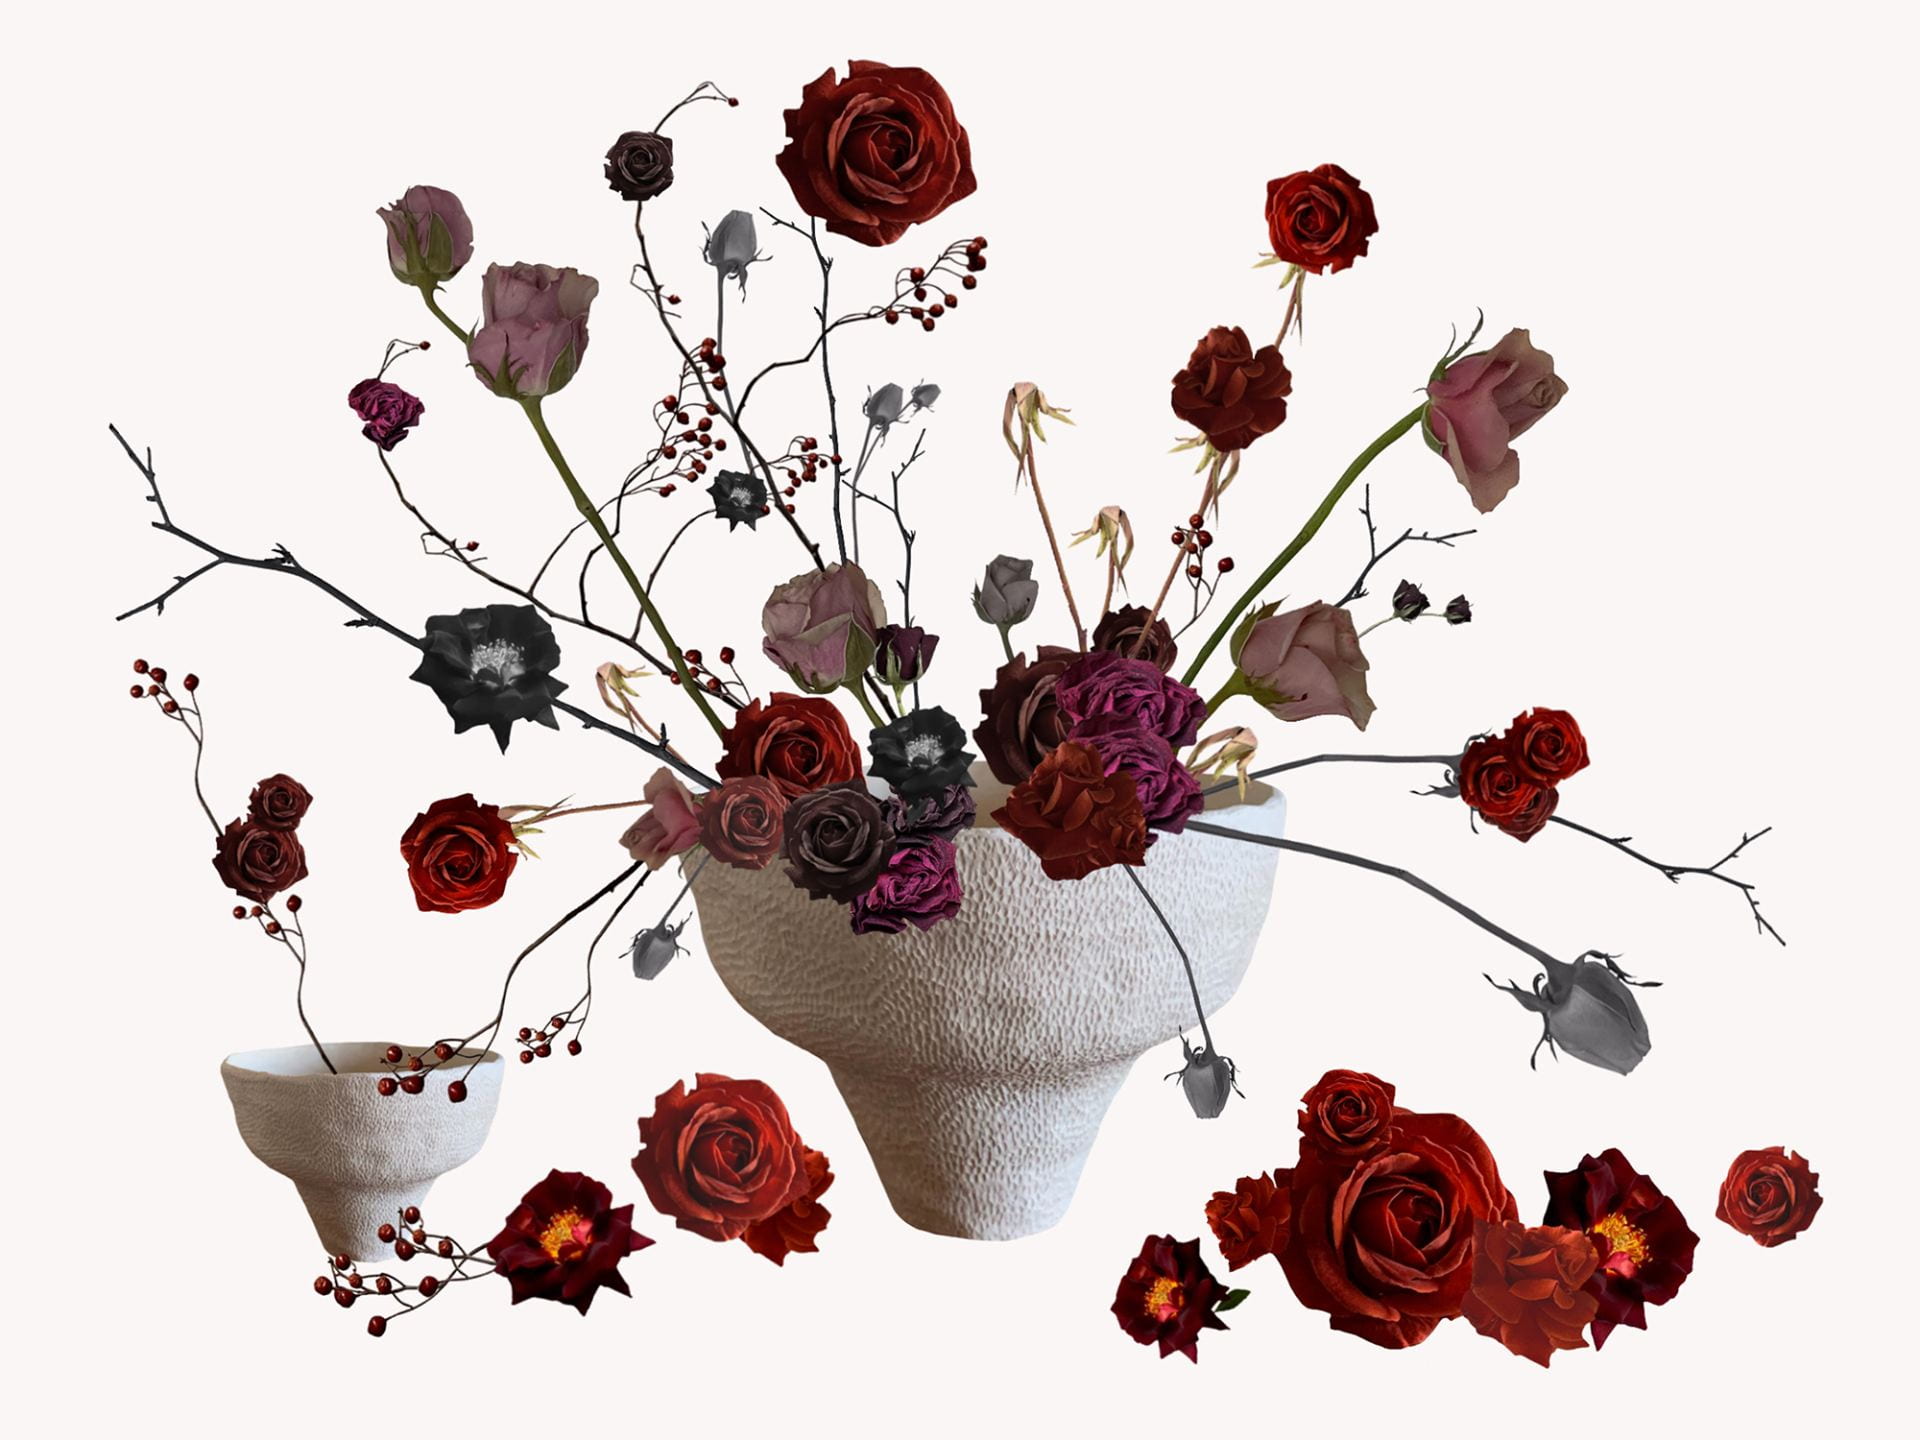 Digital collage of a floral composition including roses, rose hips, and rose stems arranged within two clay vessels